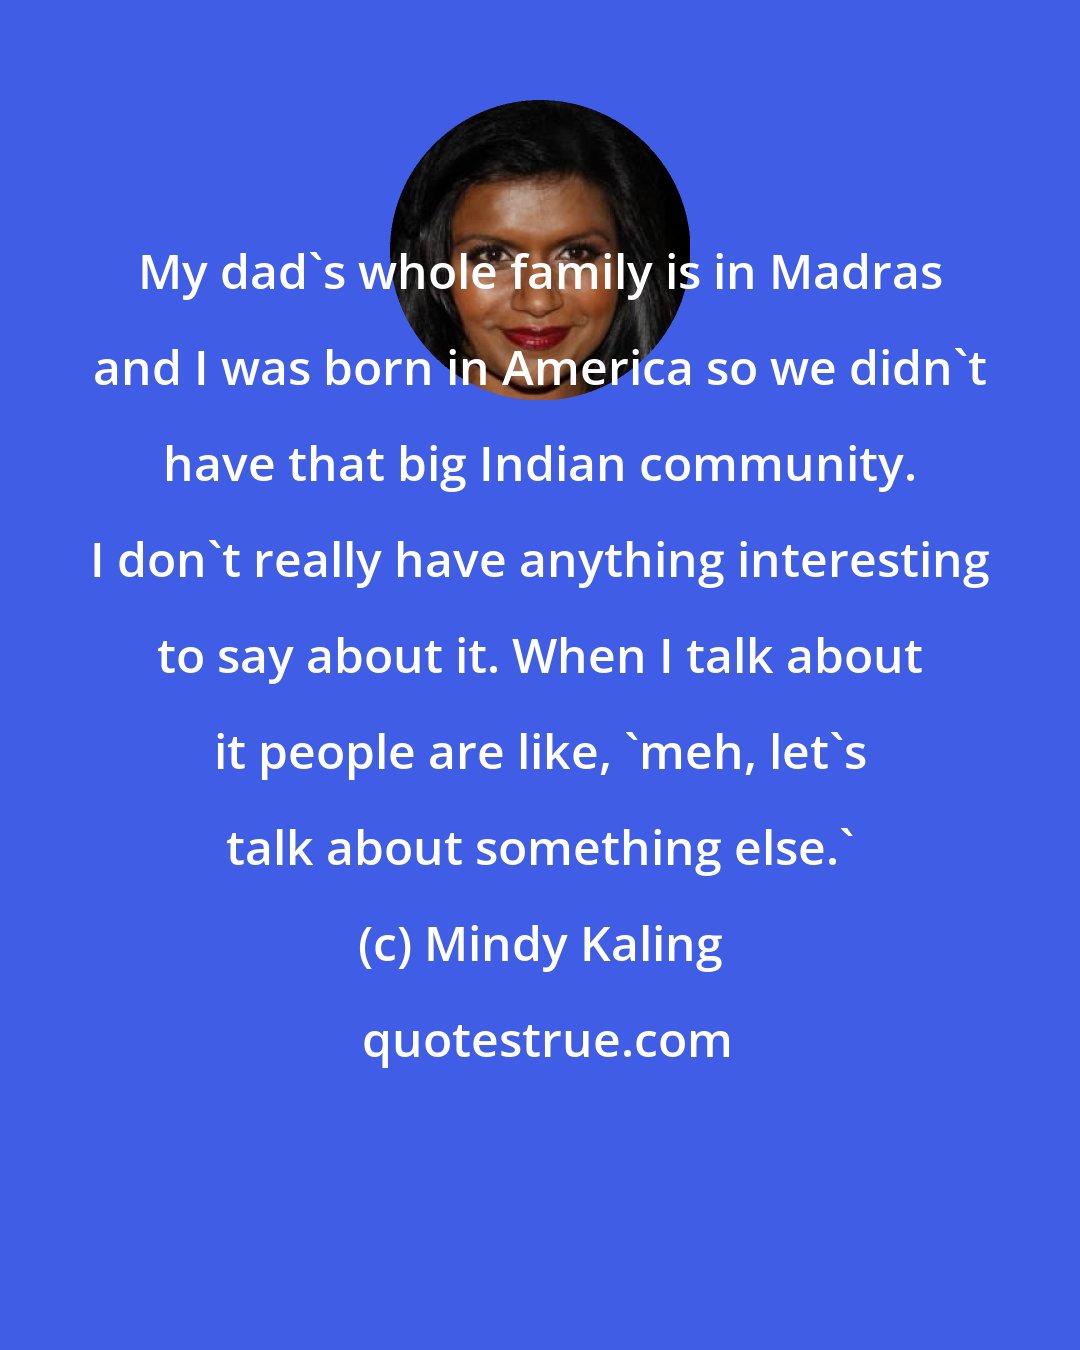 Mindy Kaling: My dad's whole family is in Madras and I was born in America so we didn't have that big Indian community. I don't really have anything interesting to say about it. When I talk about it people are like, 'meh, let's talk about something else.'